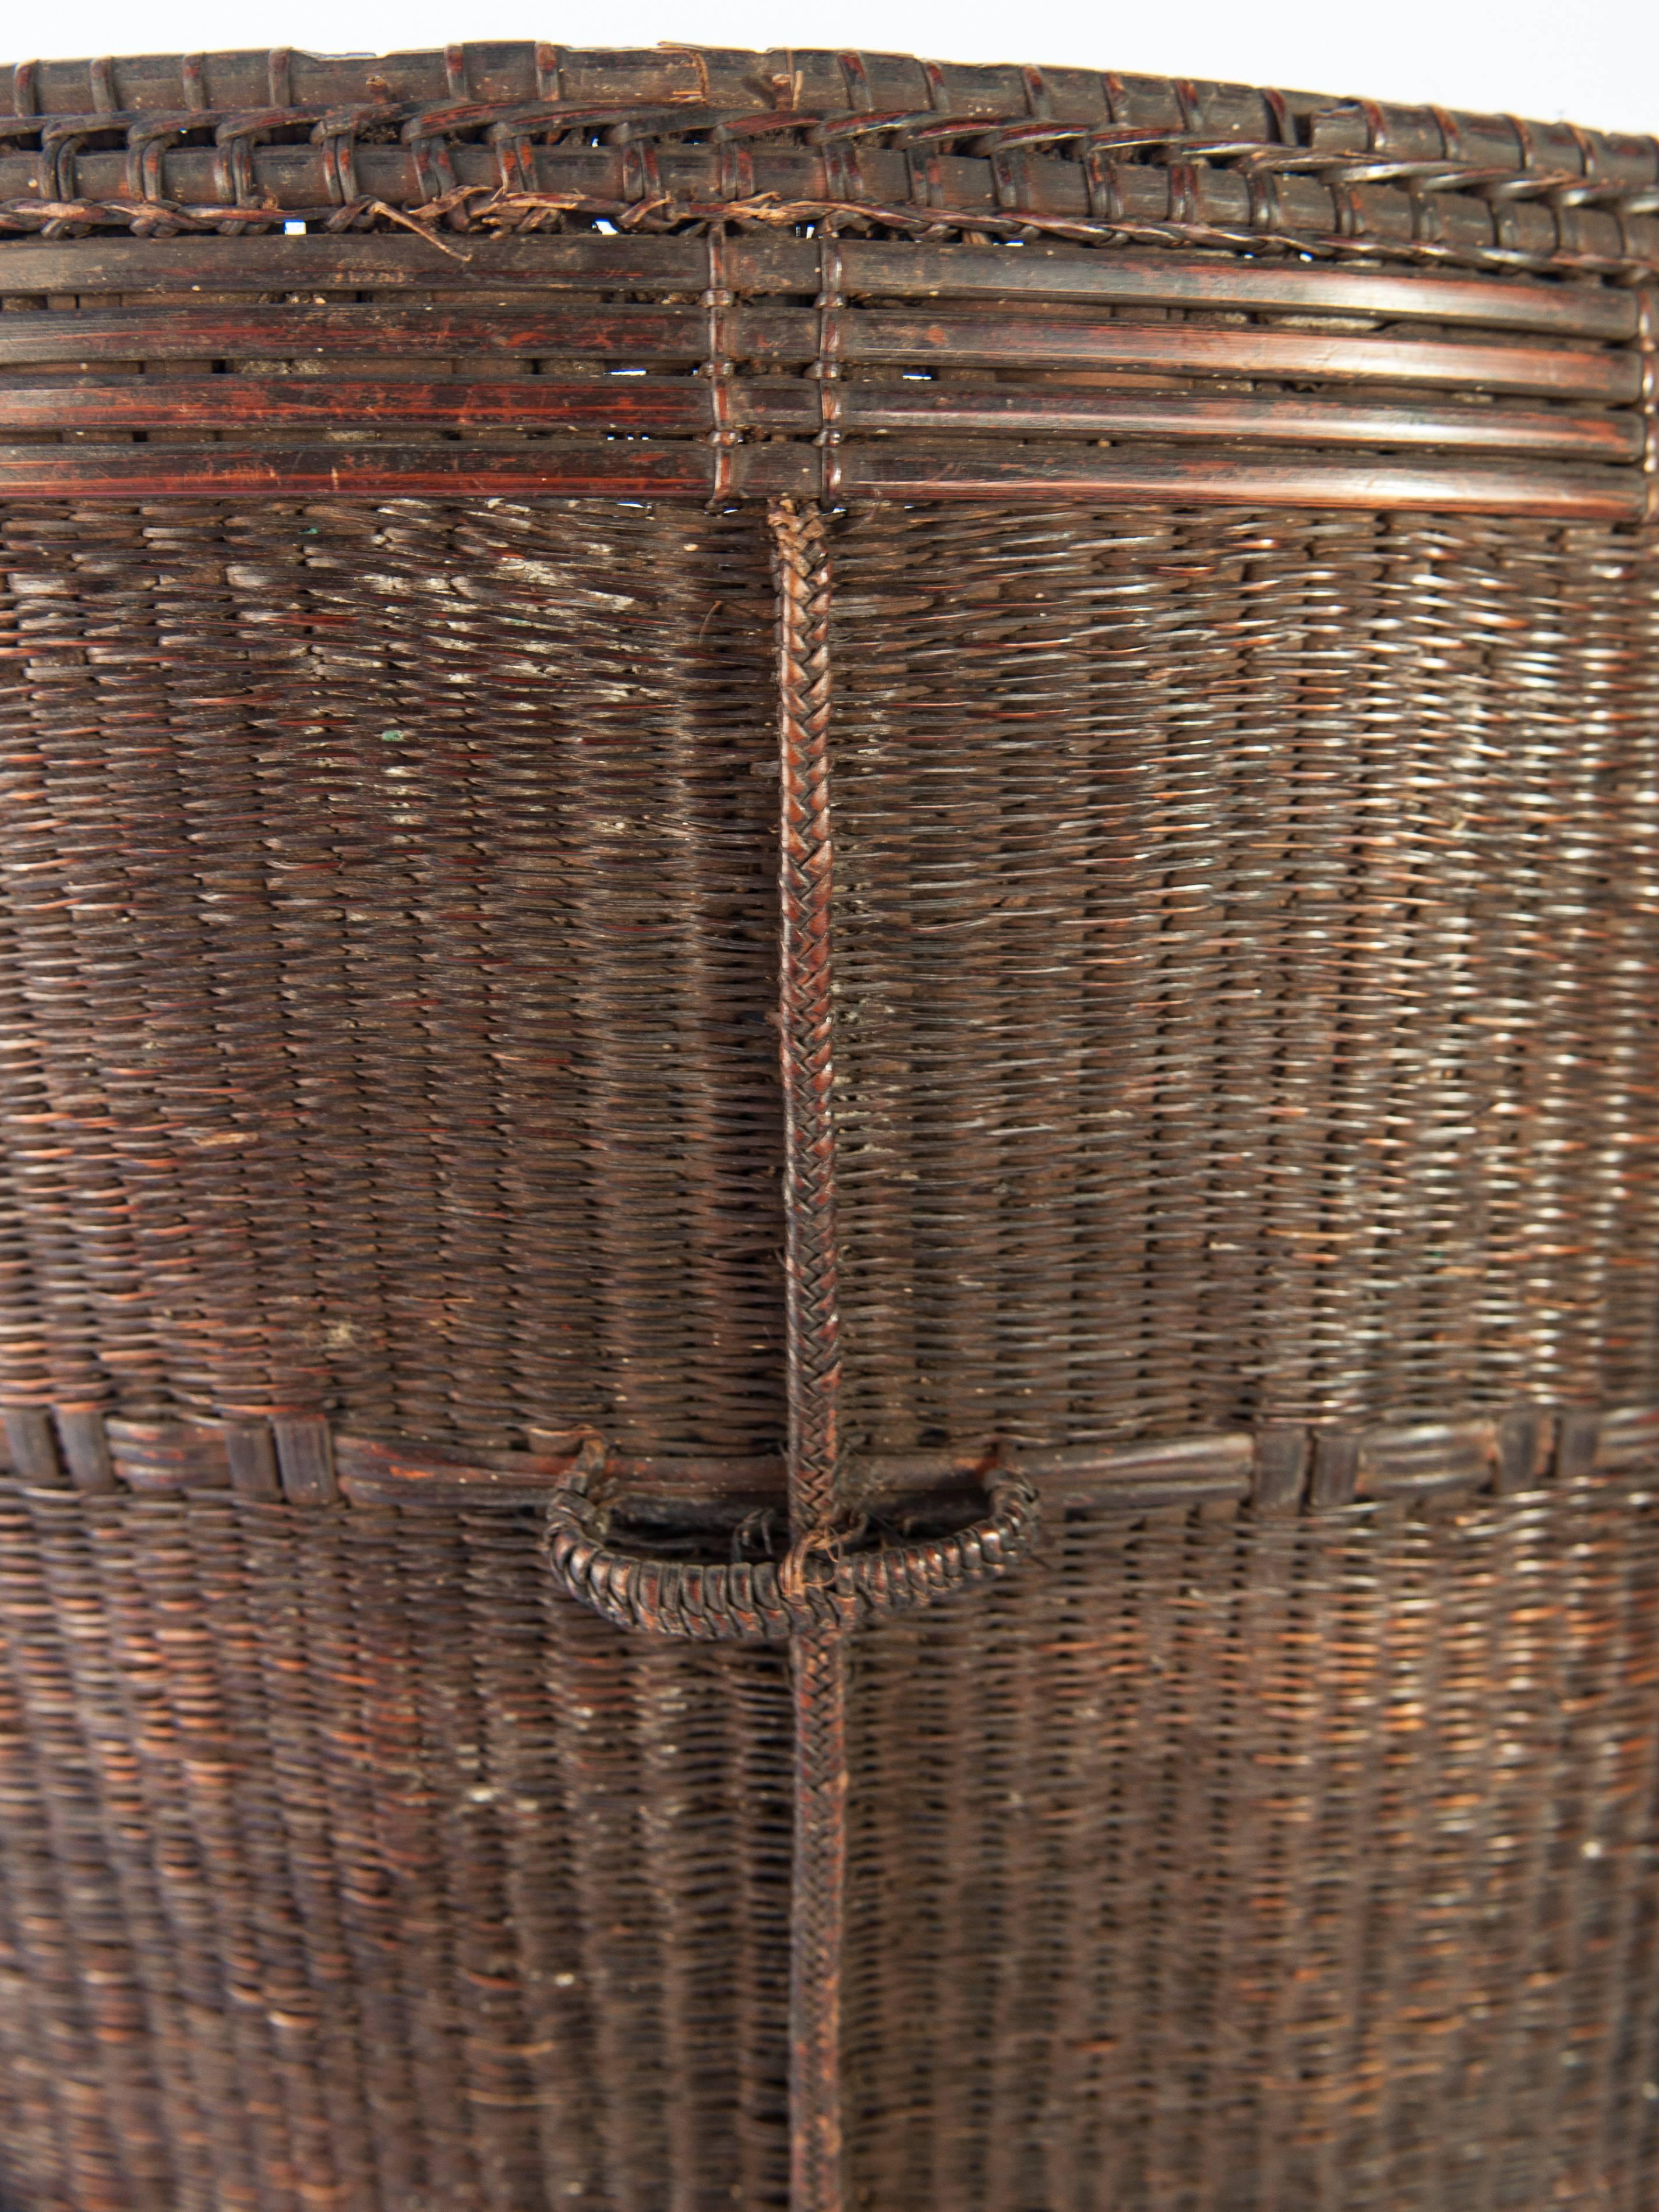 Tribal Carrying Basket from Laos, Mid-20th Century, Bamboo, Rattan, Wood Base 2